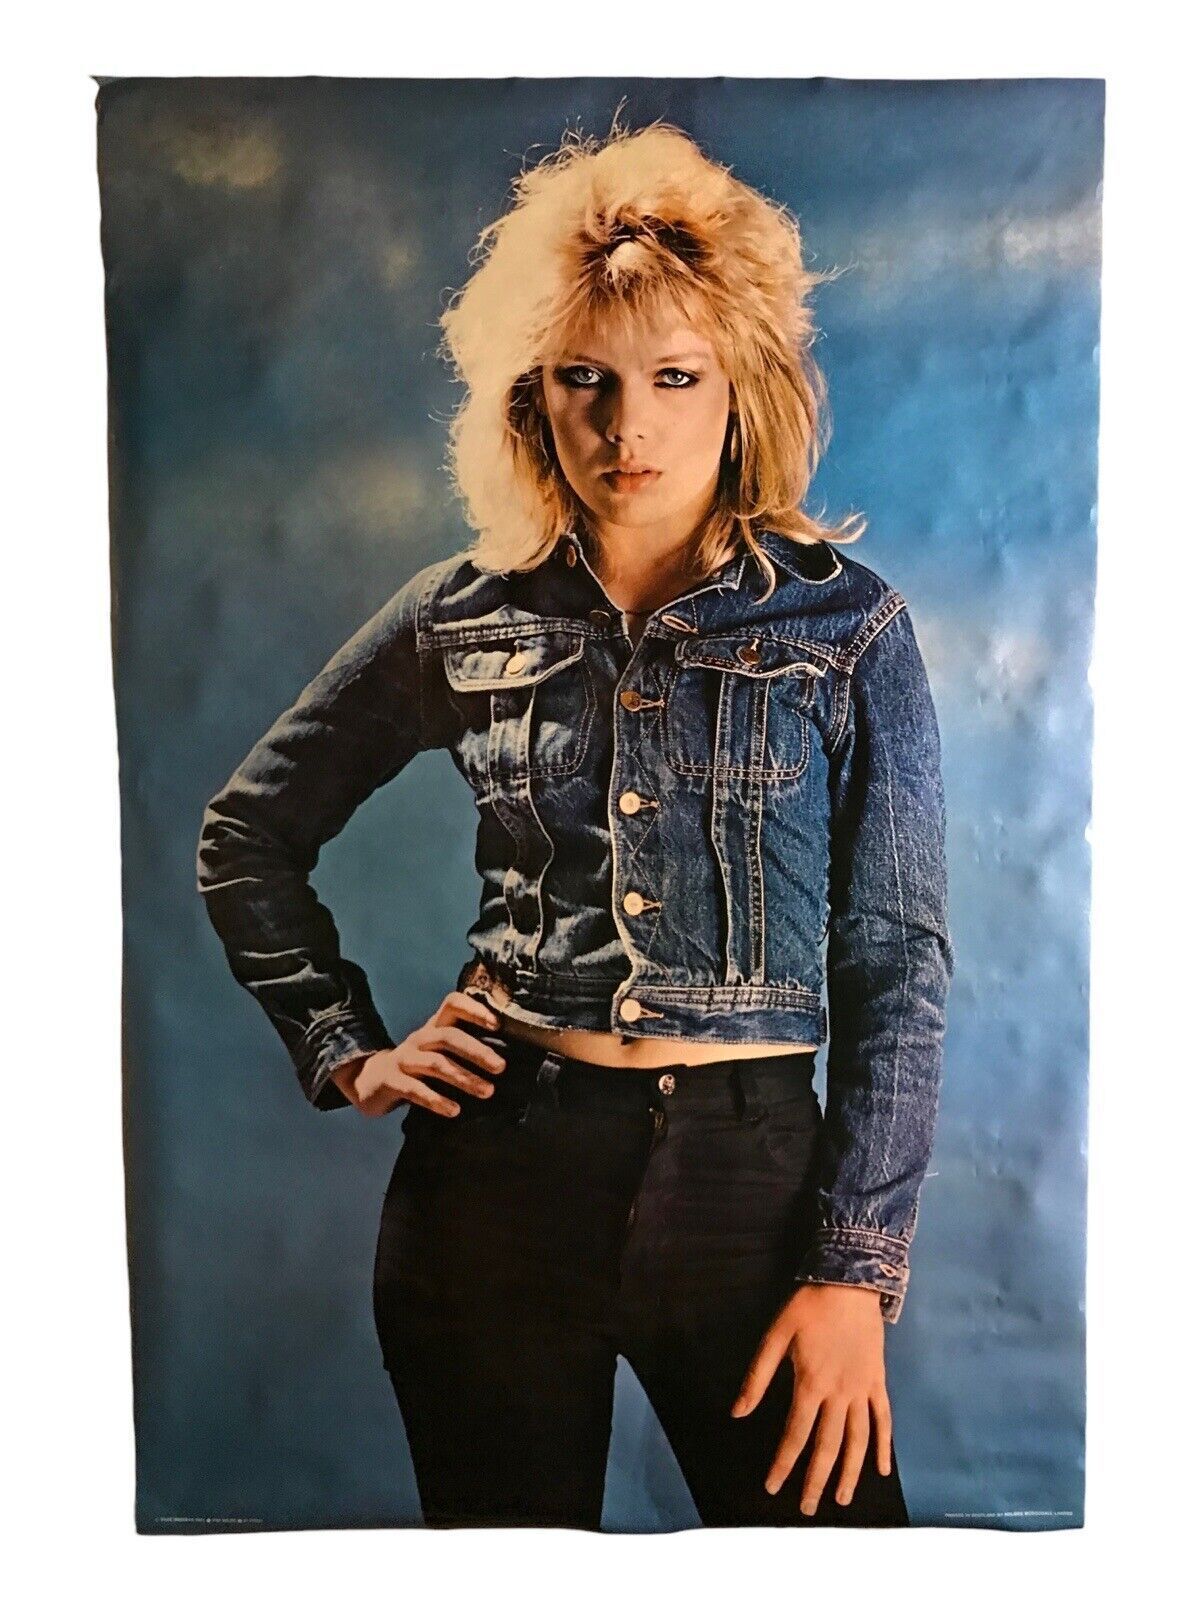 1980s Kim Wilde Original Large Vintage Band Poster 36x24 - By Pace Minerva - No.